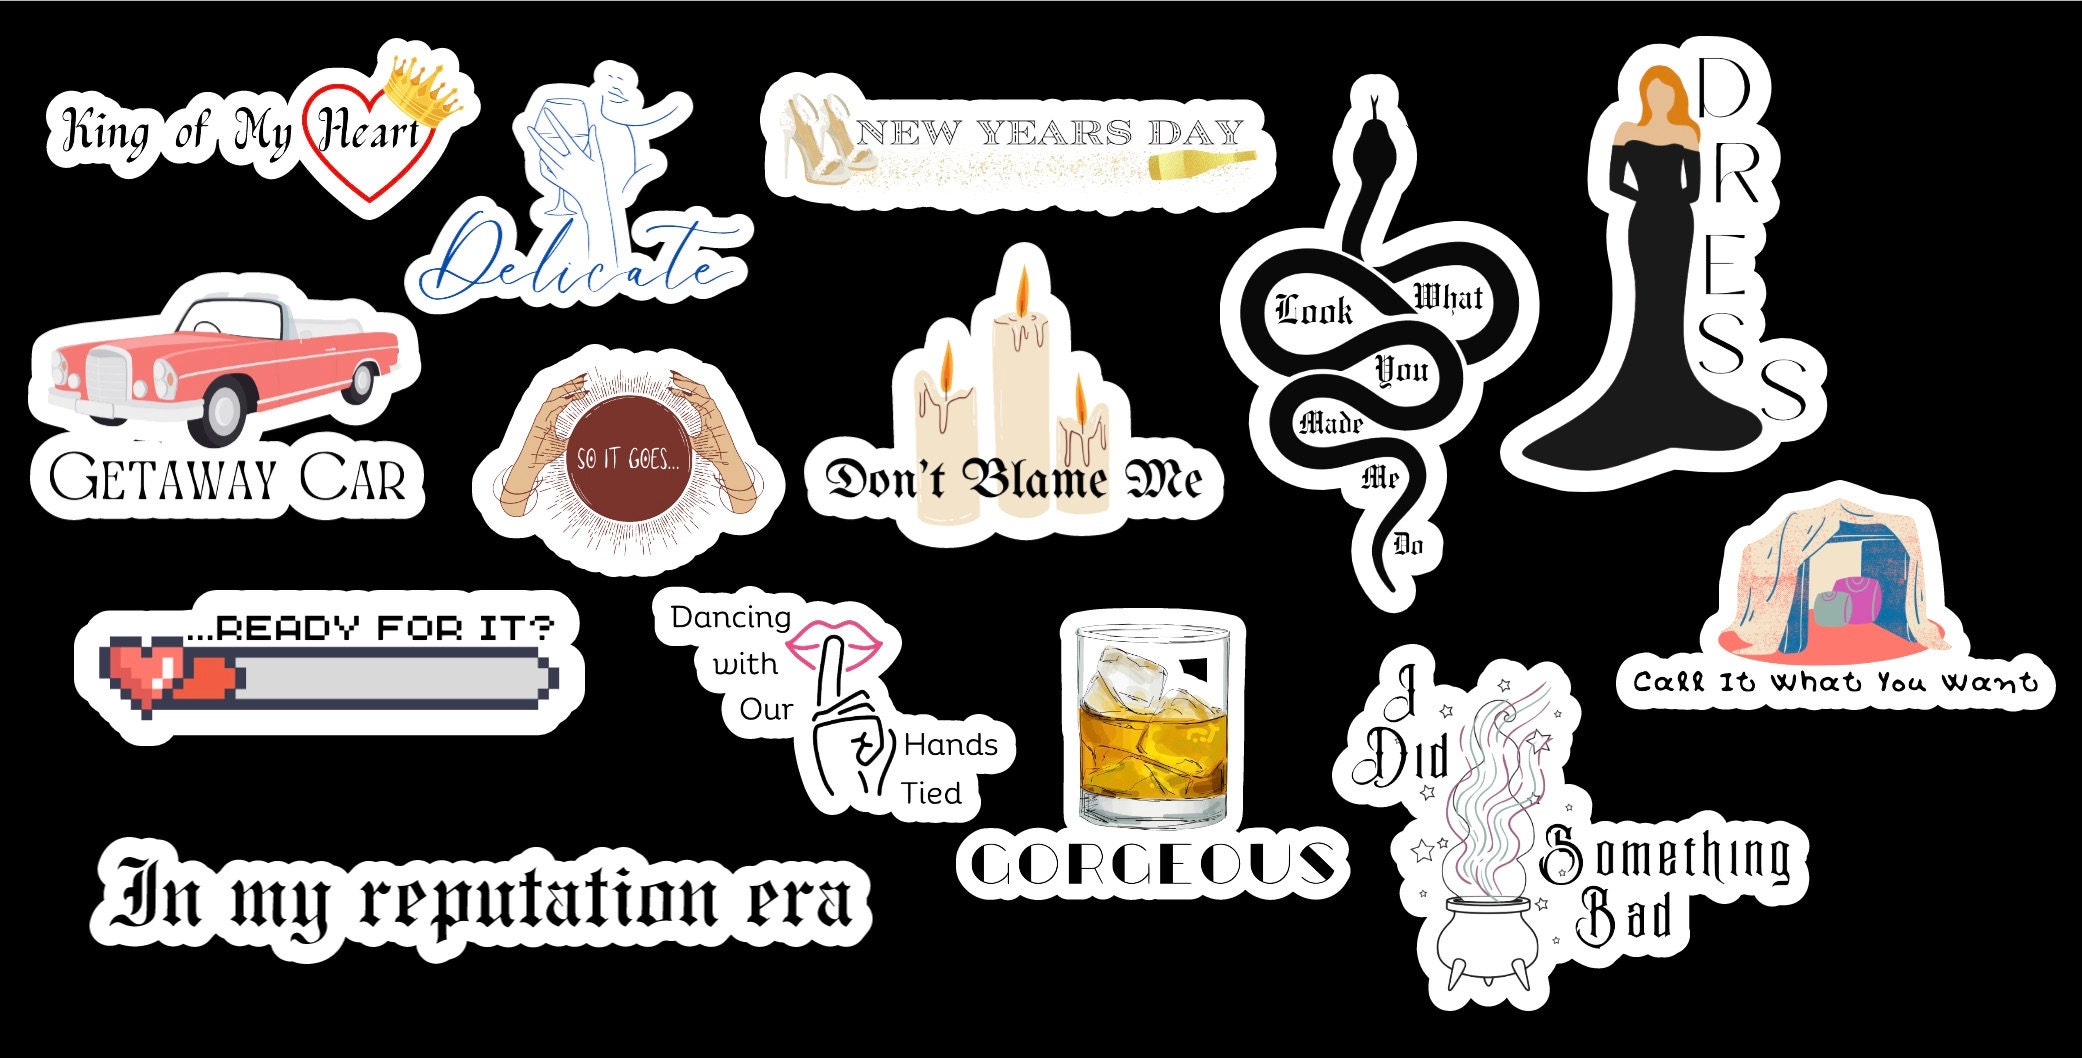 Eras Tour Cake Stickers | Aesthetic Cake Stickers | Taylor Swift Stickers |  Waterproof Stickers | Vinyl Stickers | Laptop Stickers | Sticker